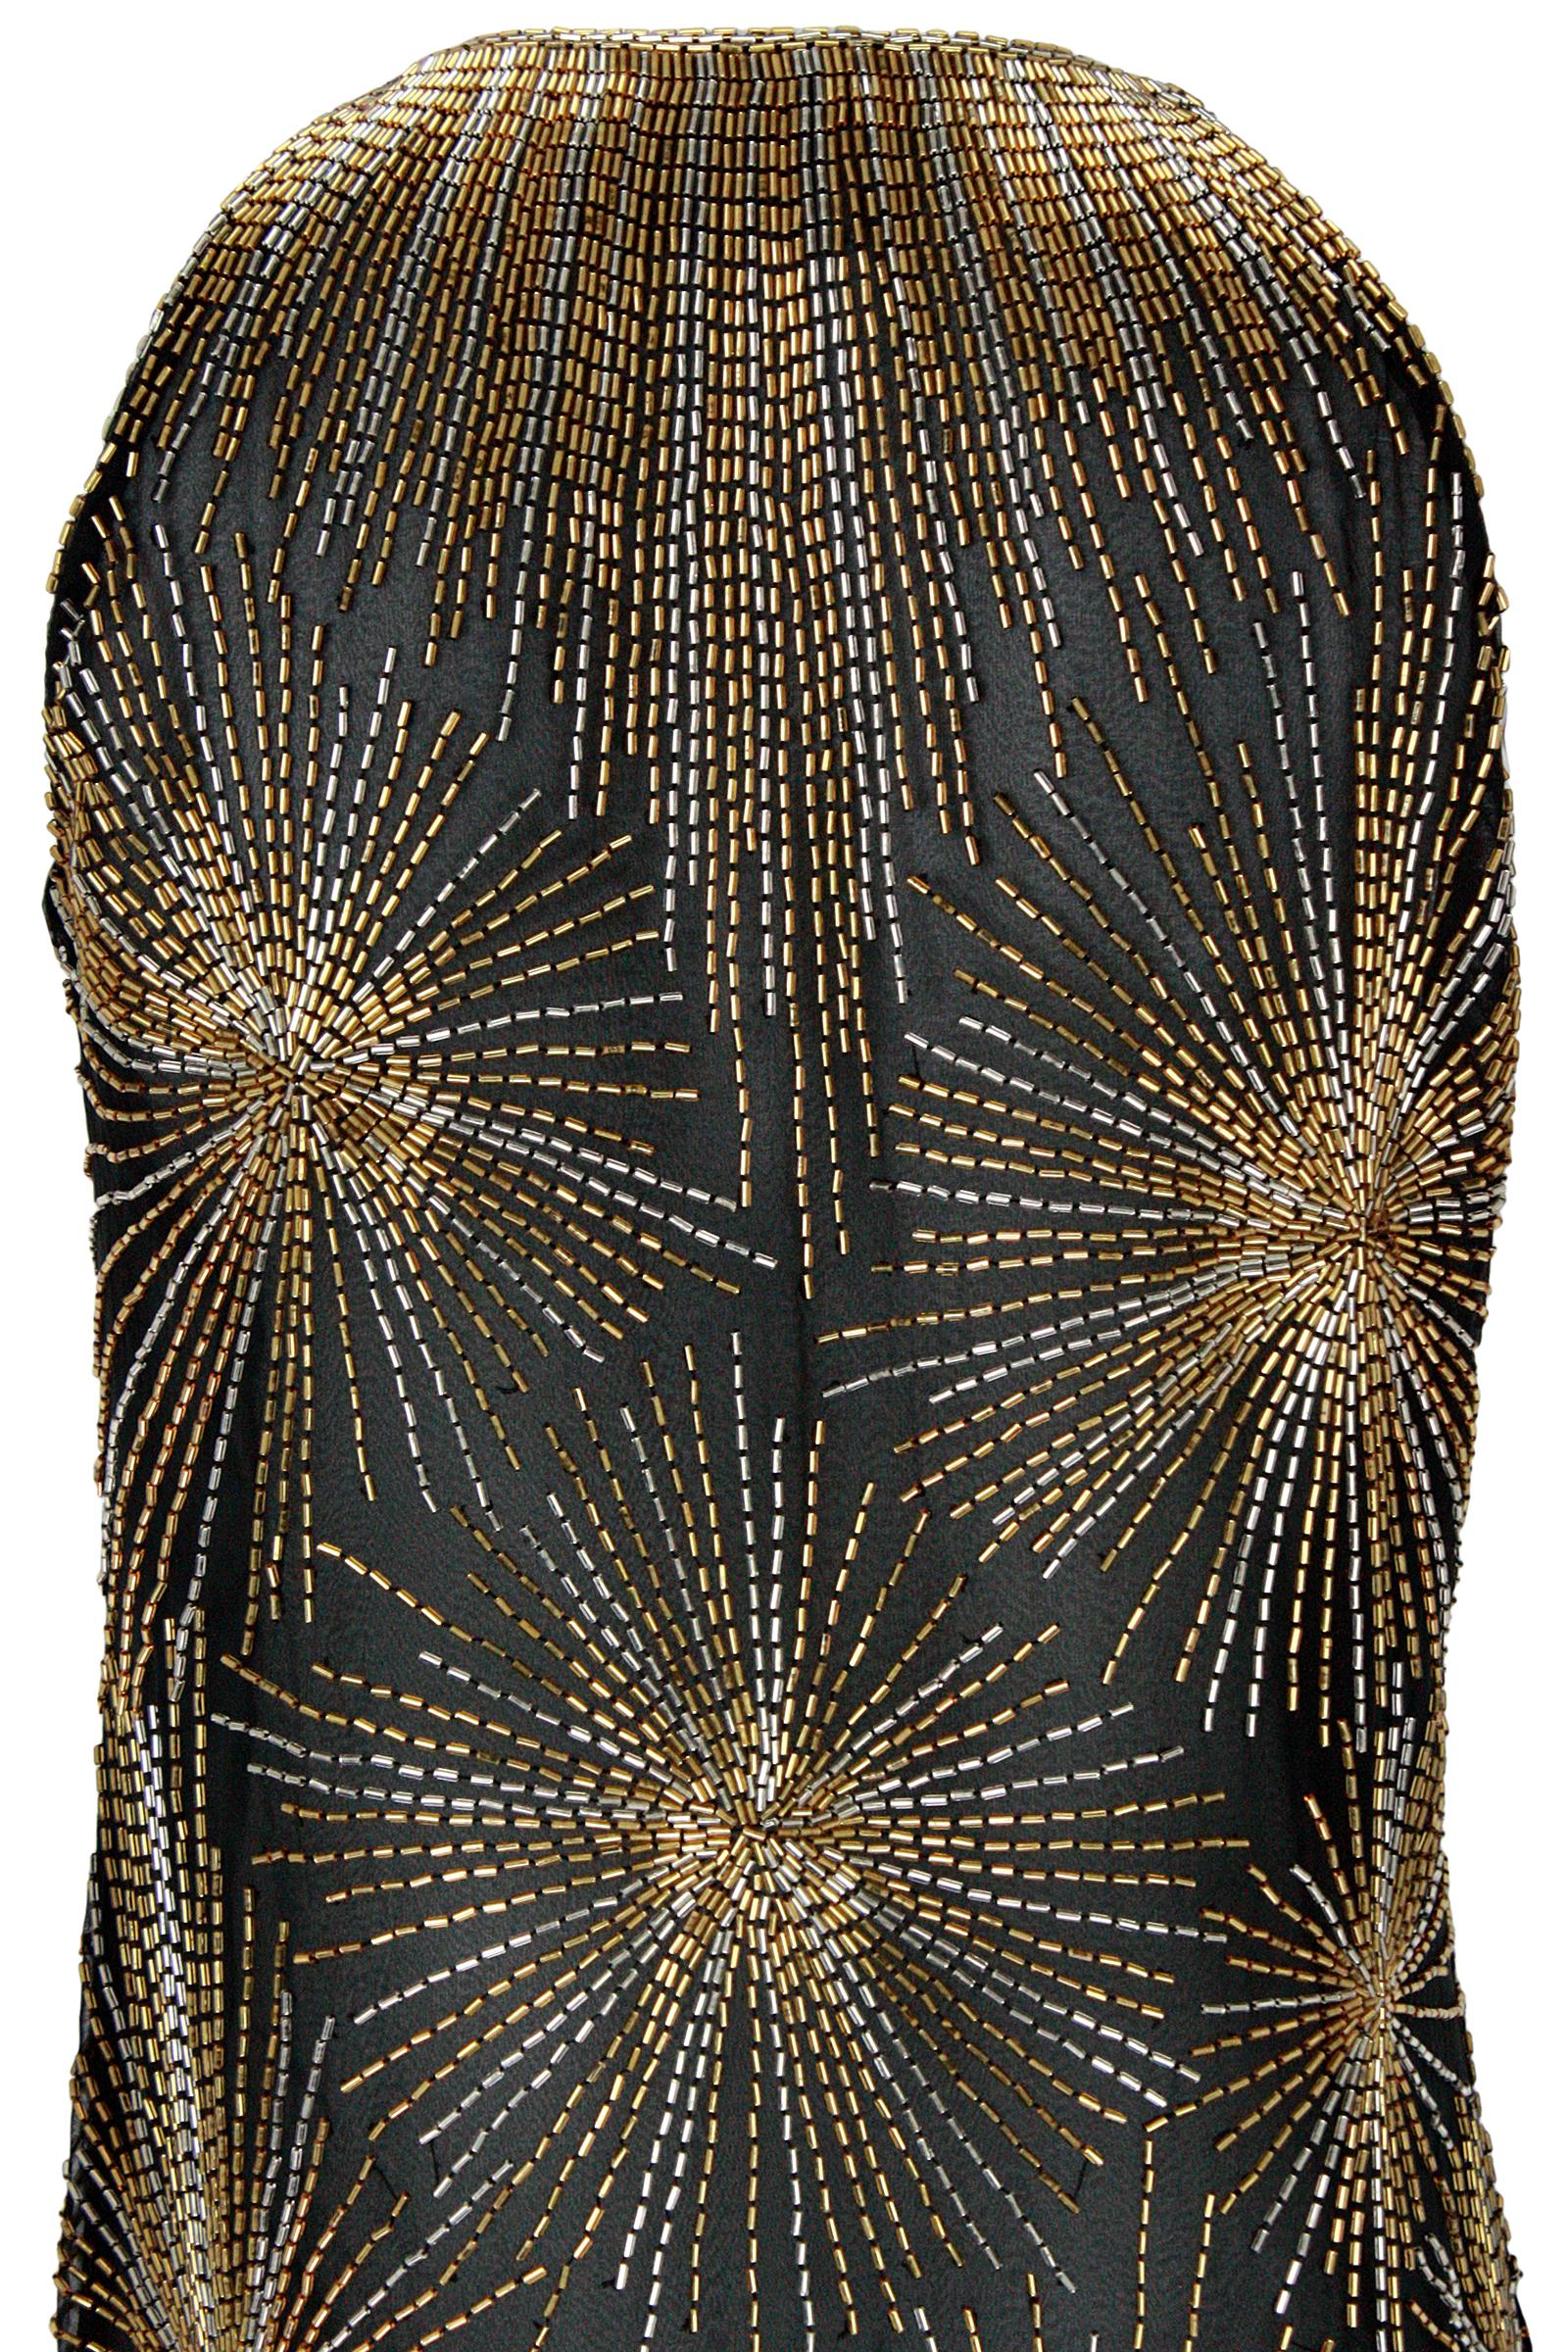 Women's 1970s Halston ICONIC 'FIREWORKS' beaded Black & Gold Gown with Jacket 